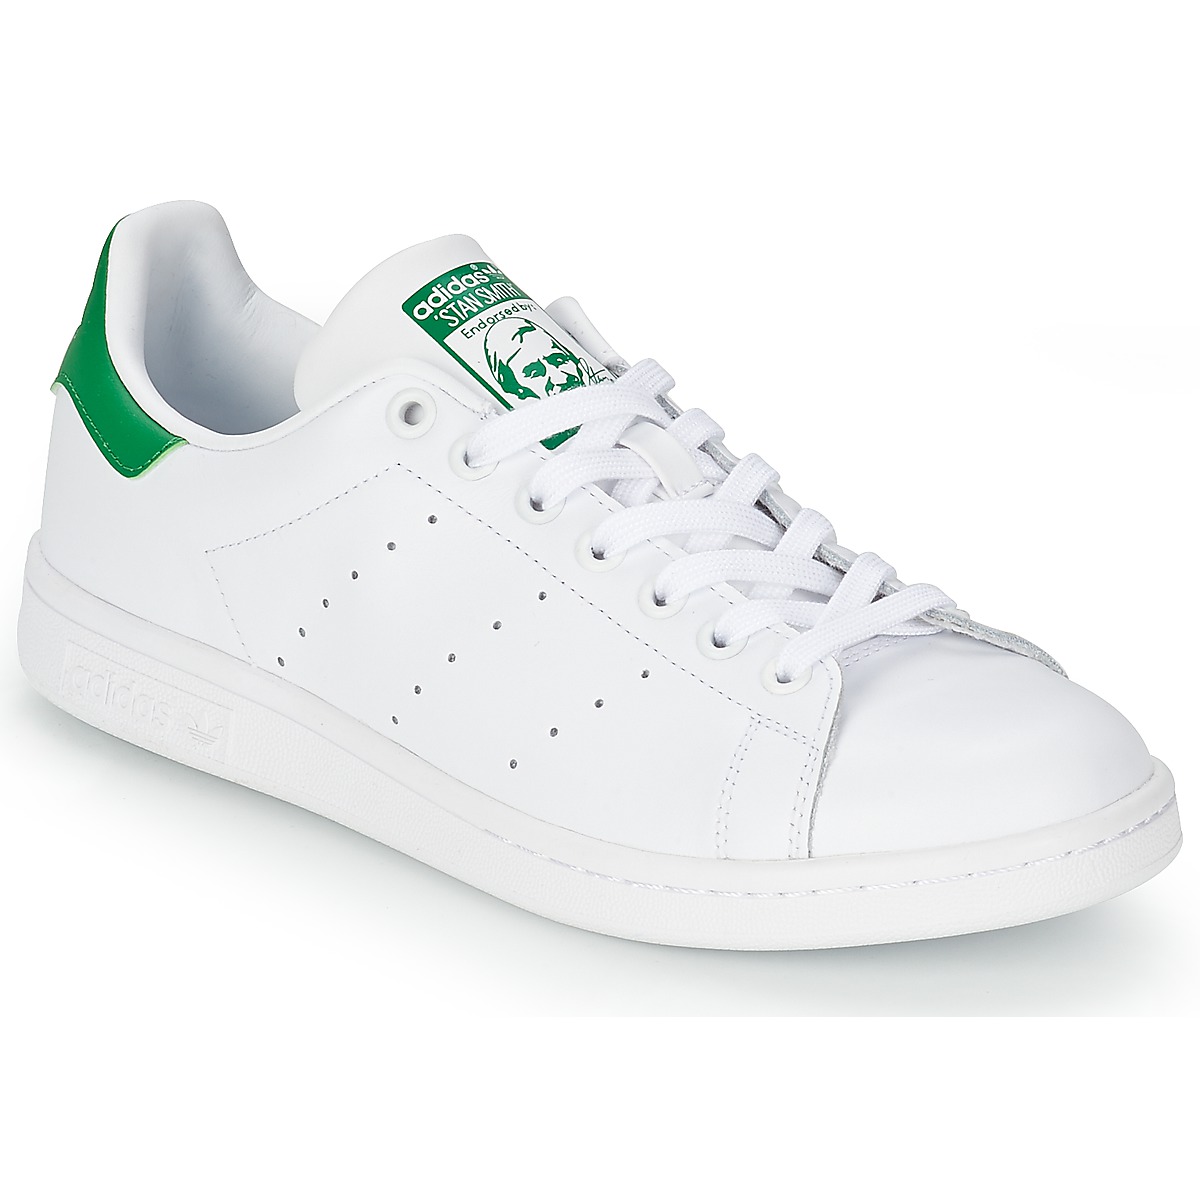 duizend kolonie Inwoner adidas Originals STAN SMITH White / Green - Free delivery | Spartoo NET ! -  Shoes Low top trainers USD/$79.20